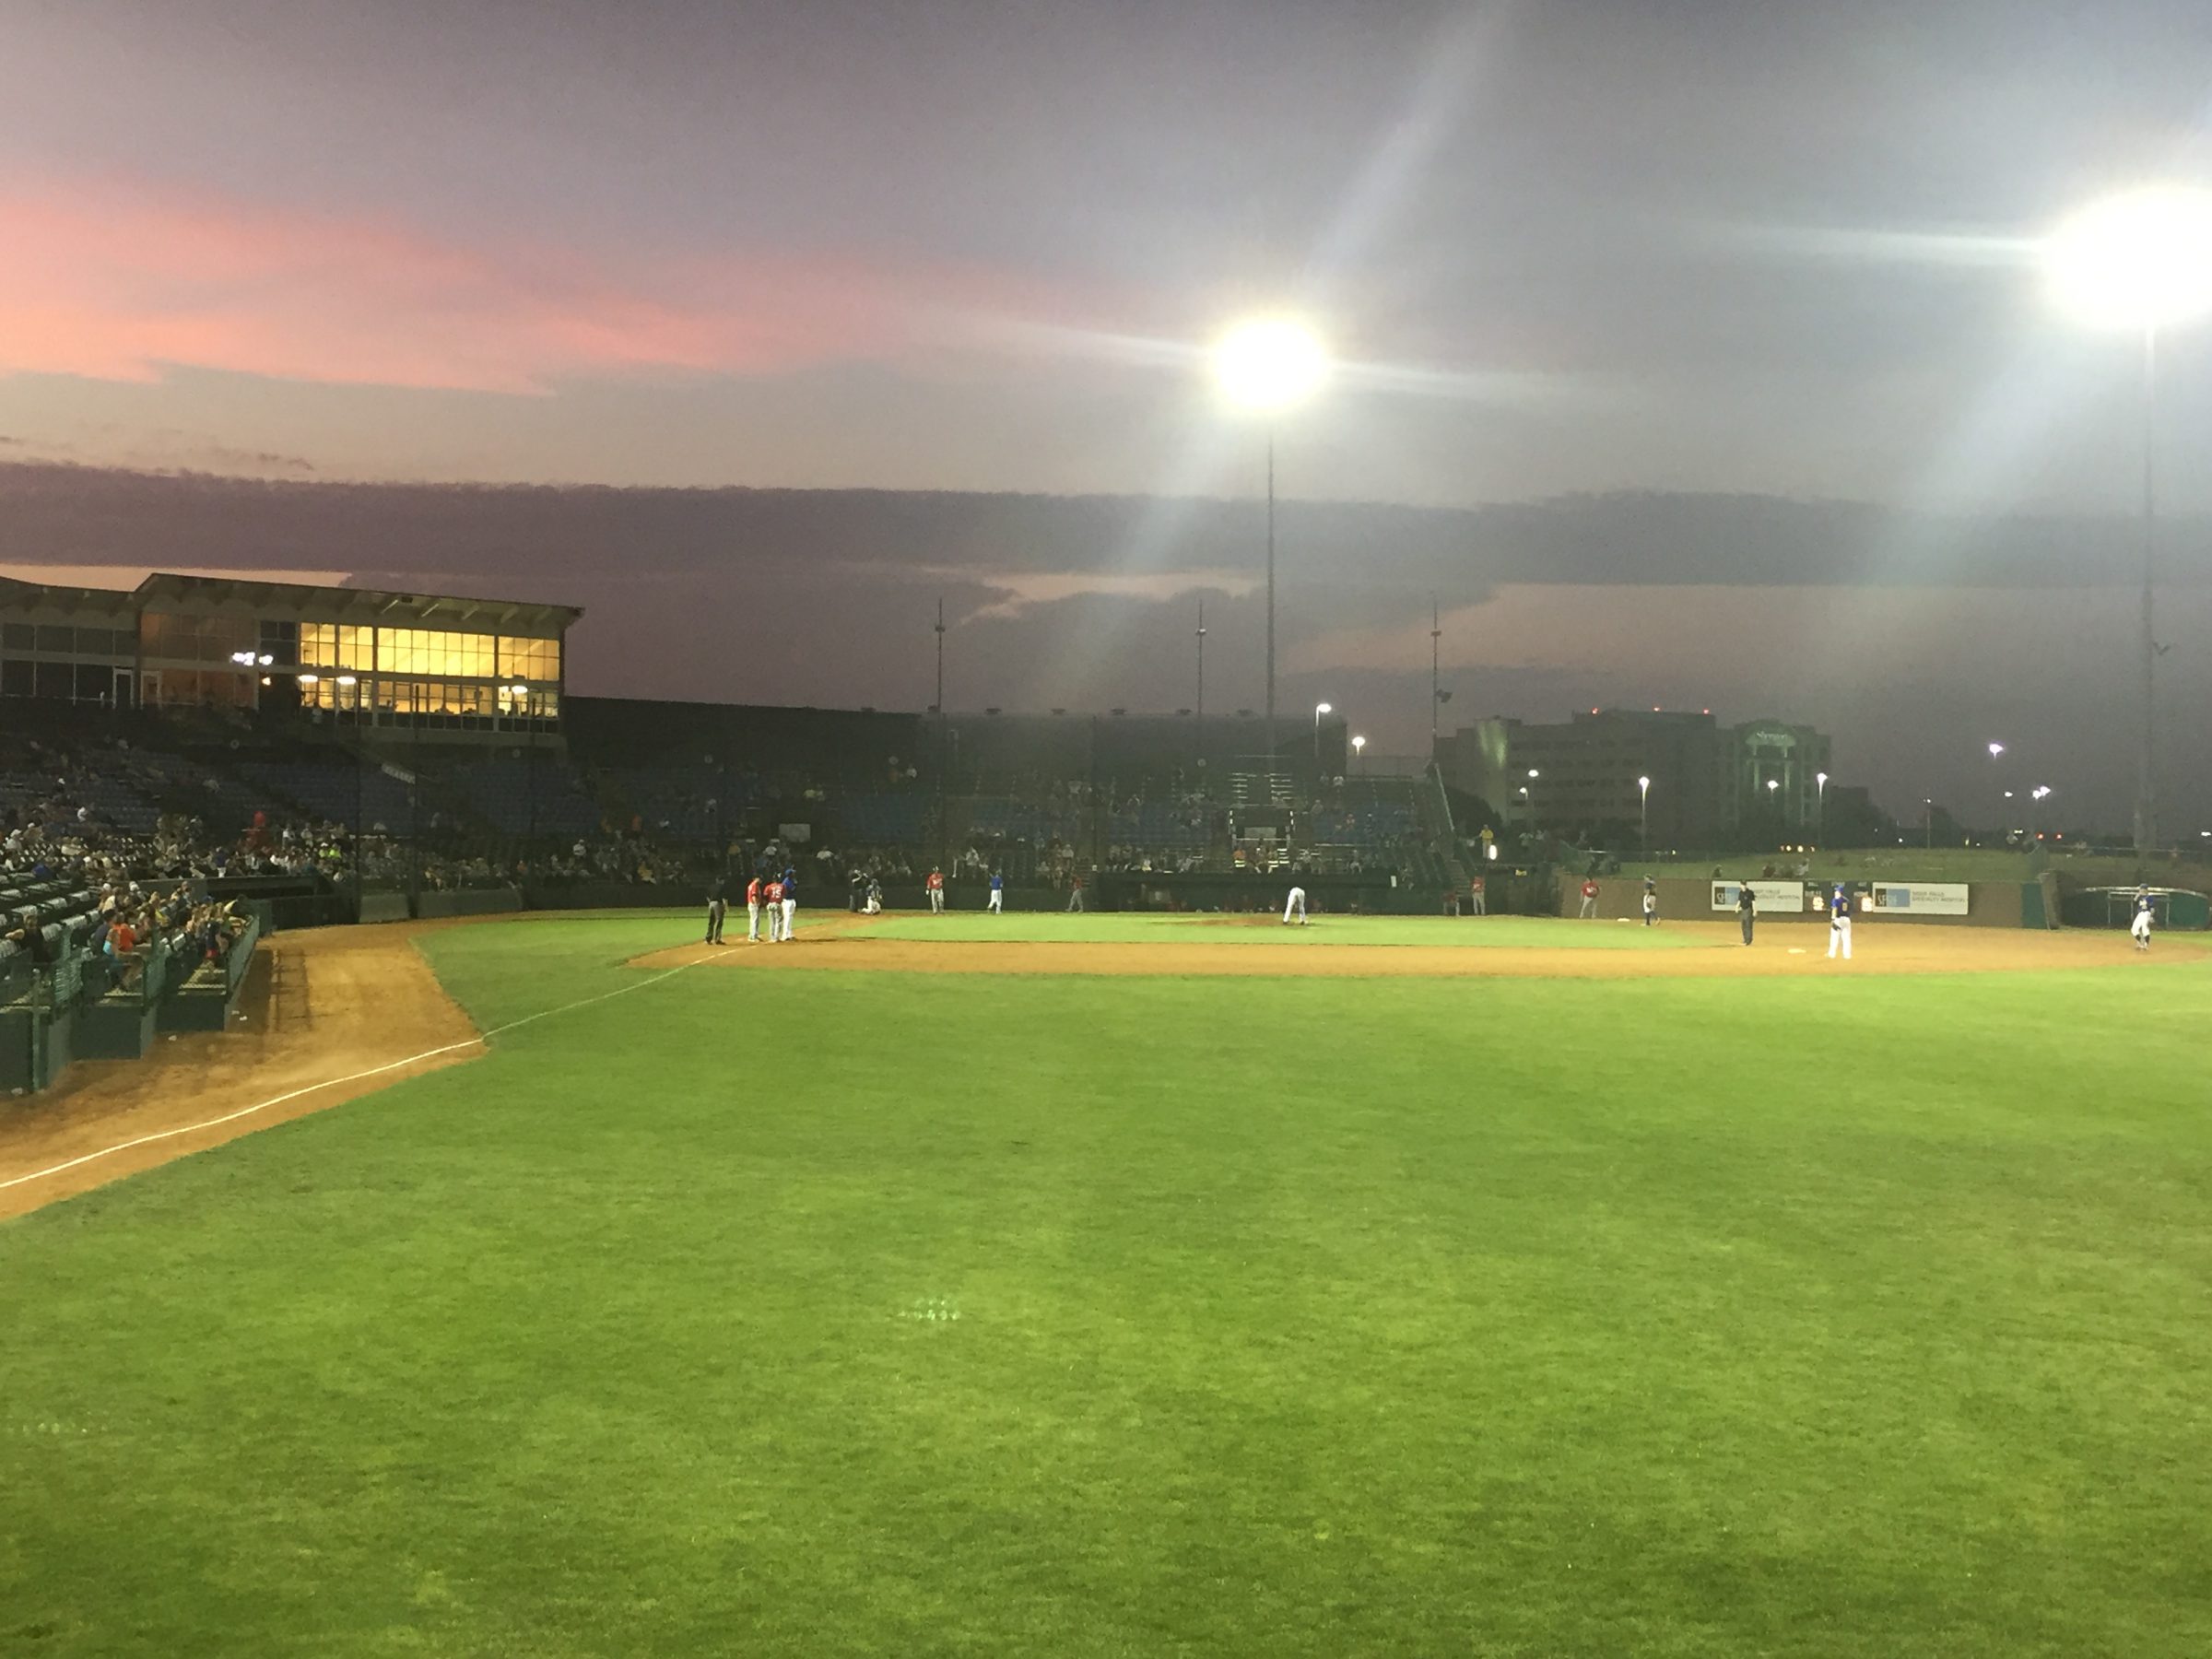 Blogging, Baseball, and a Birthday: My First Week at 9 Clouds